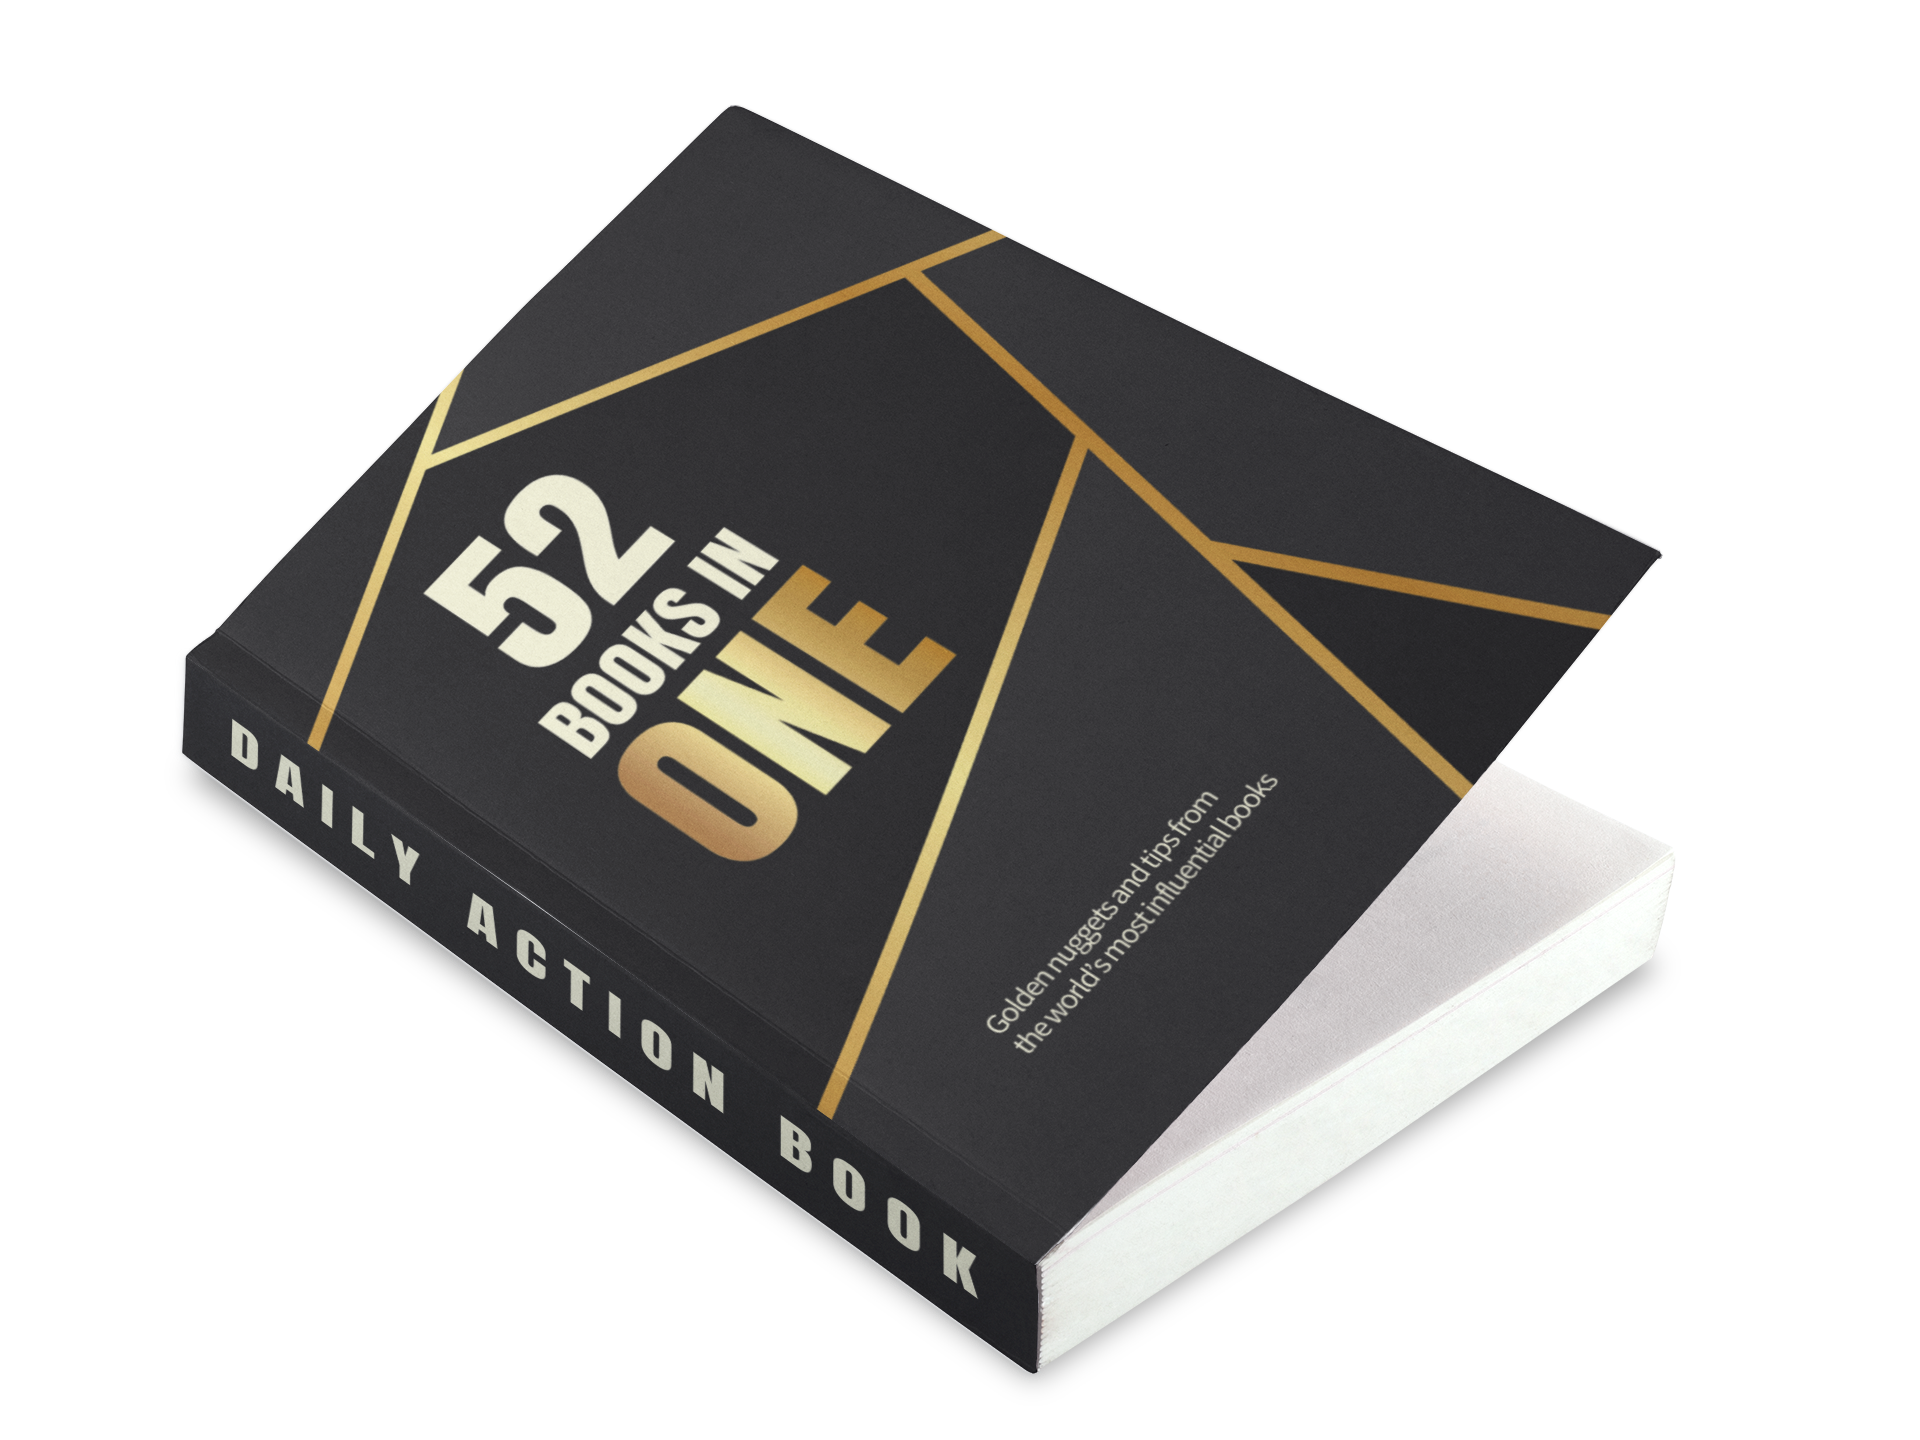 COMPLETE 52 Books in One - Daily Action Book